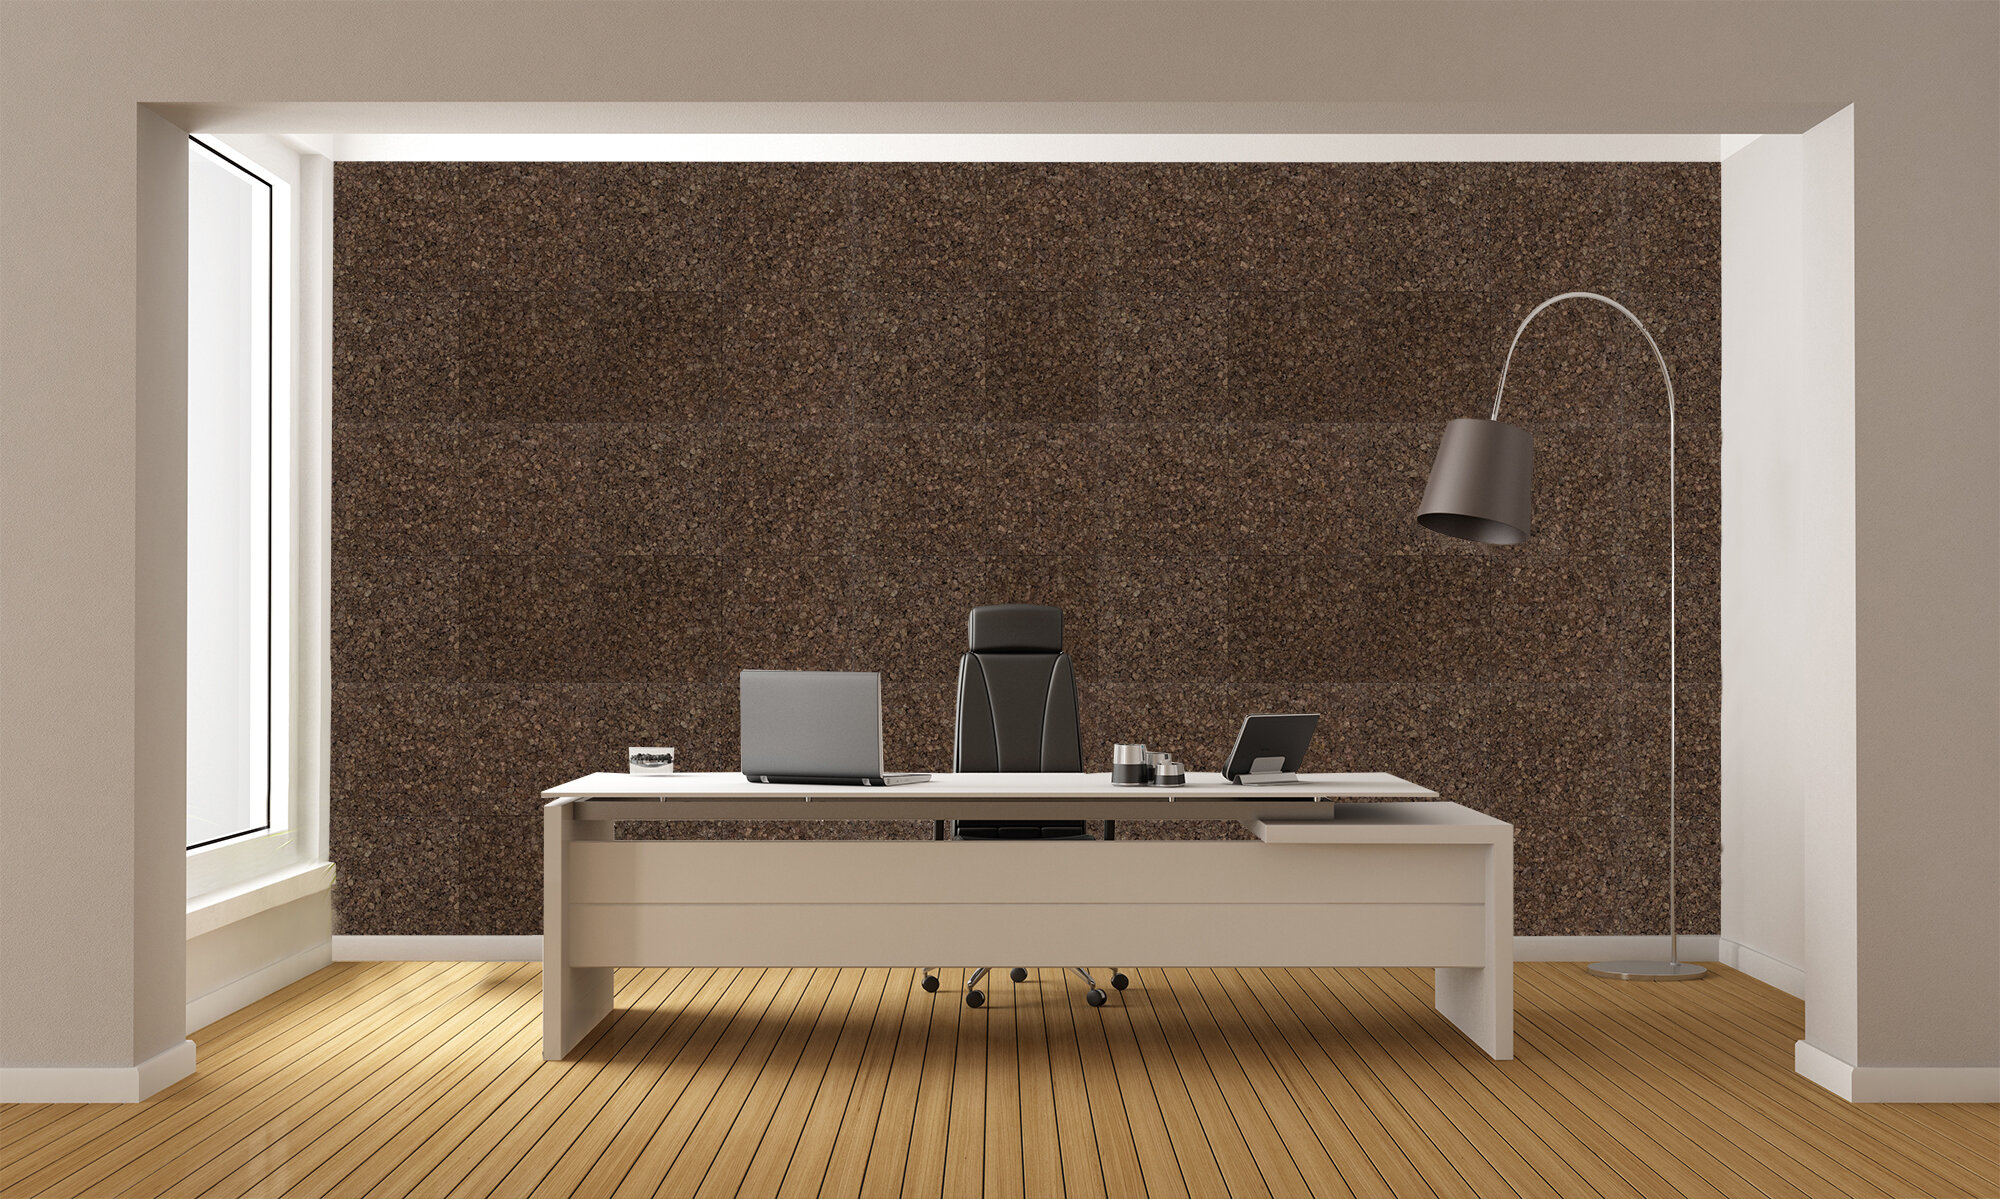 Stunning cork wall coverings